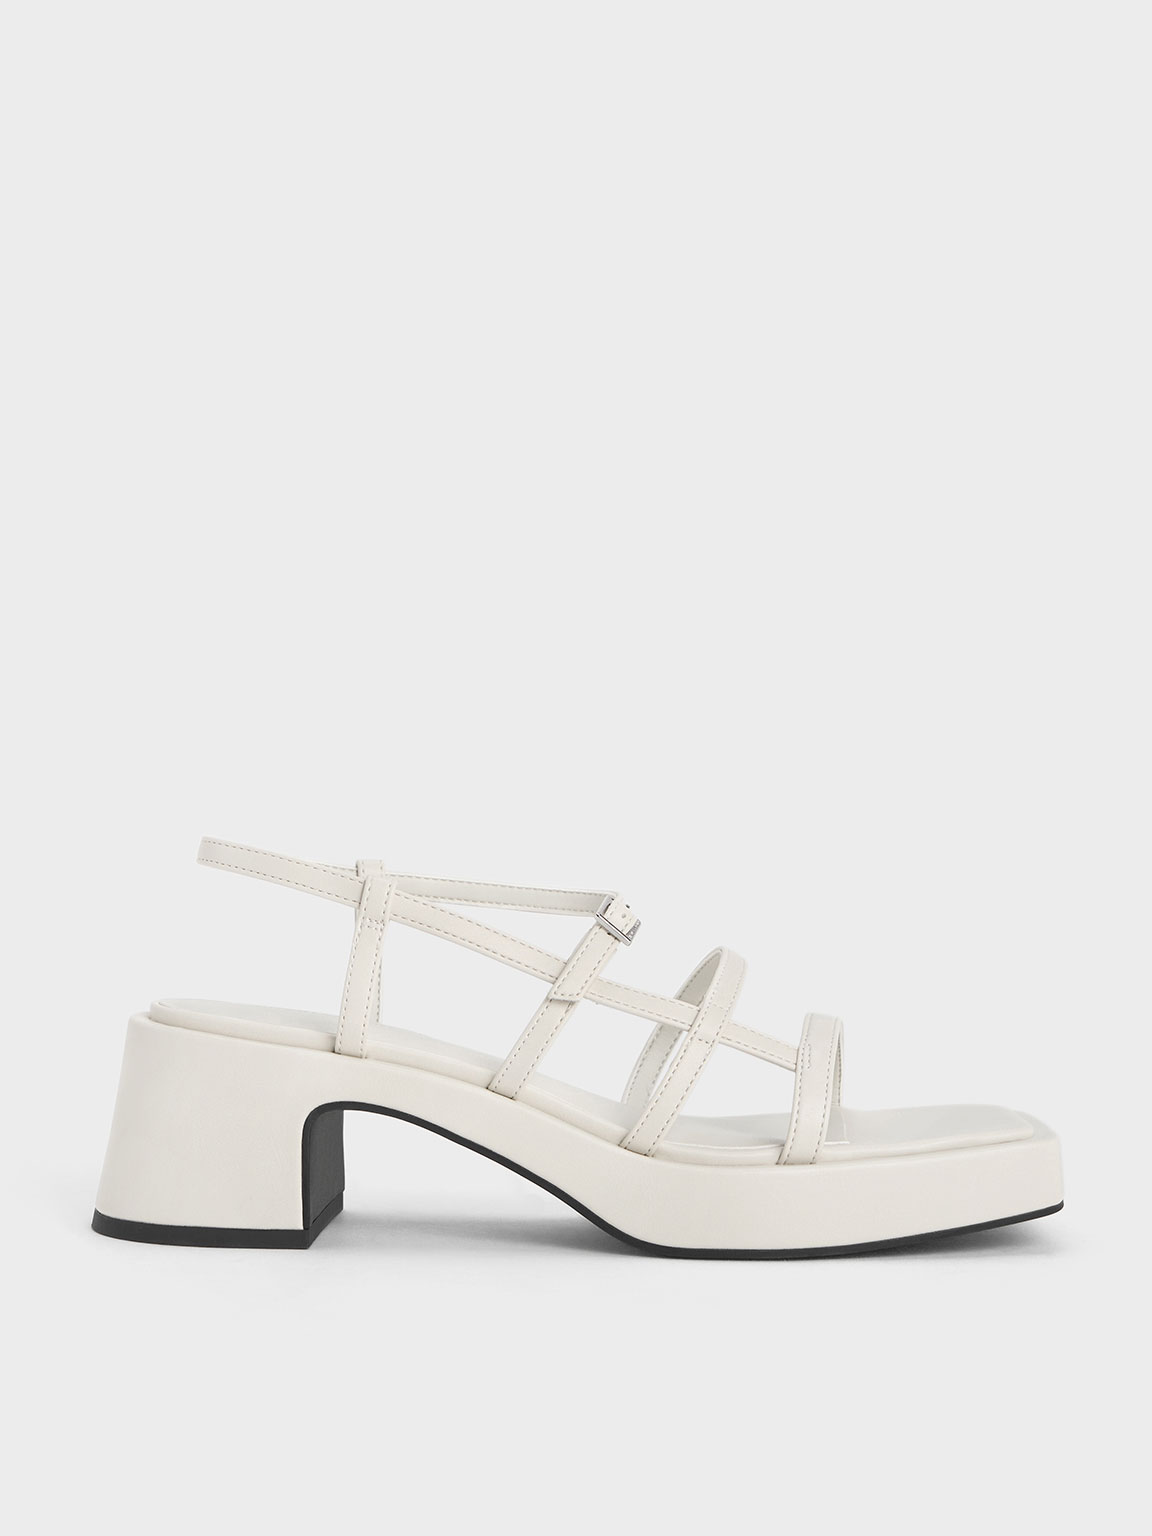 Charles & Keith Selene Strappy Sandals In Chalk